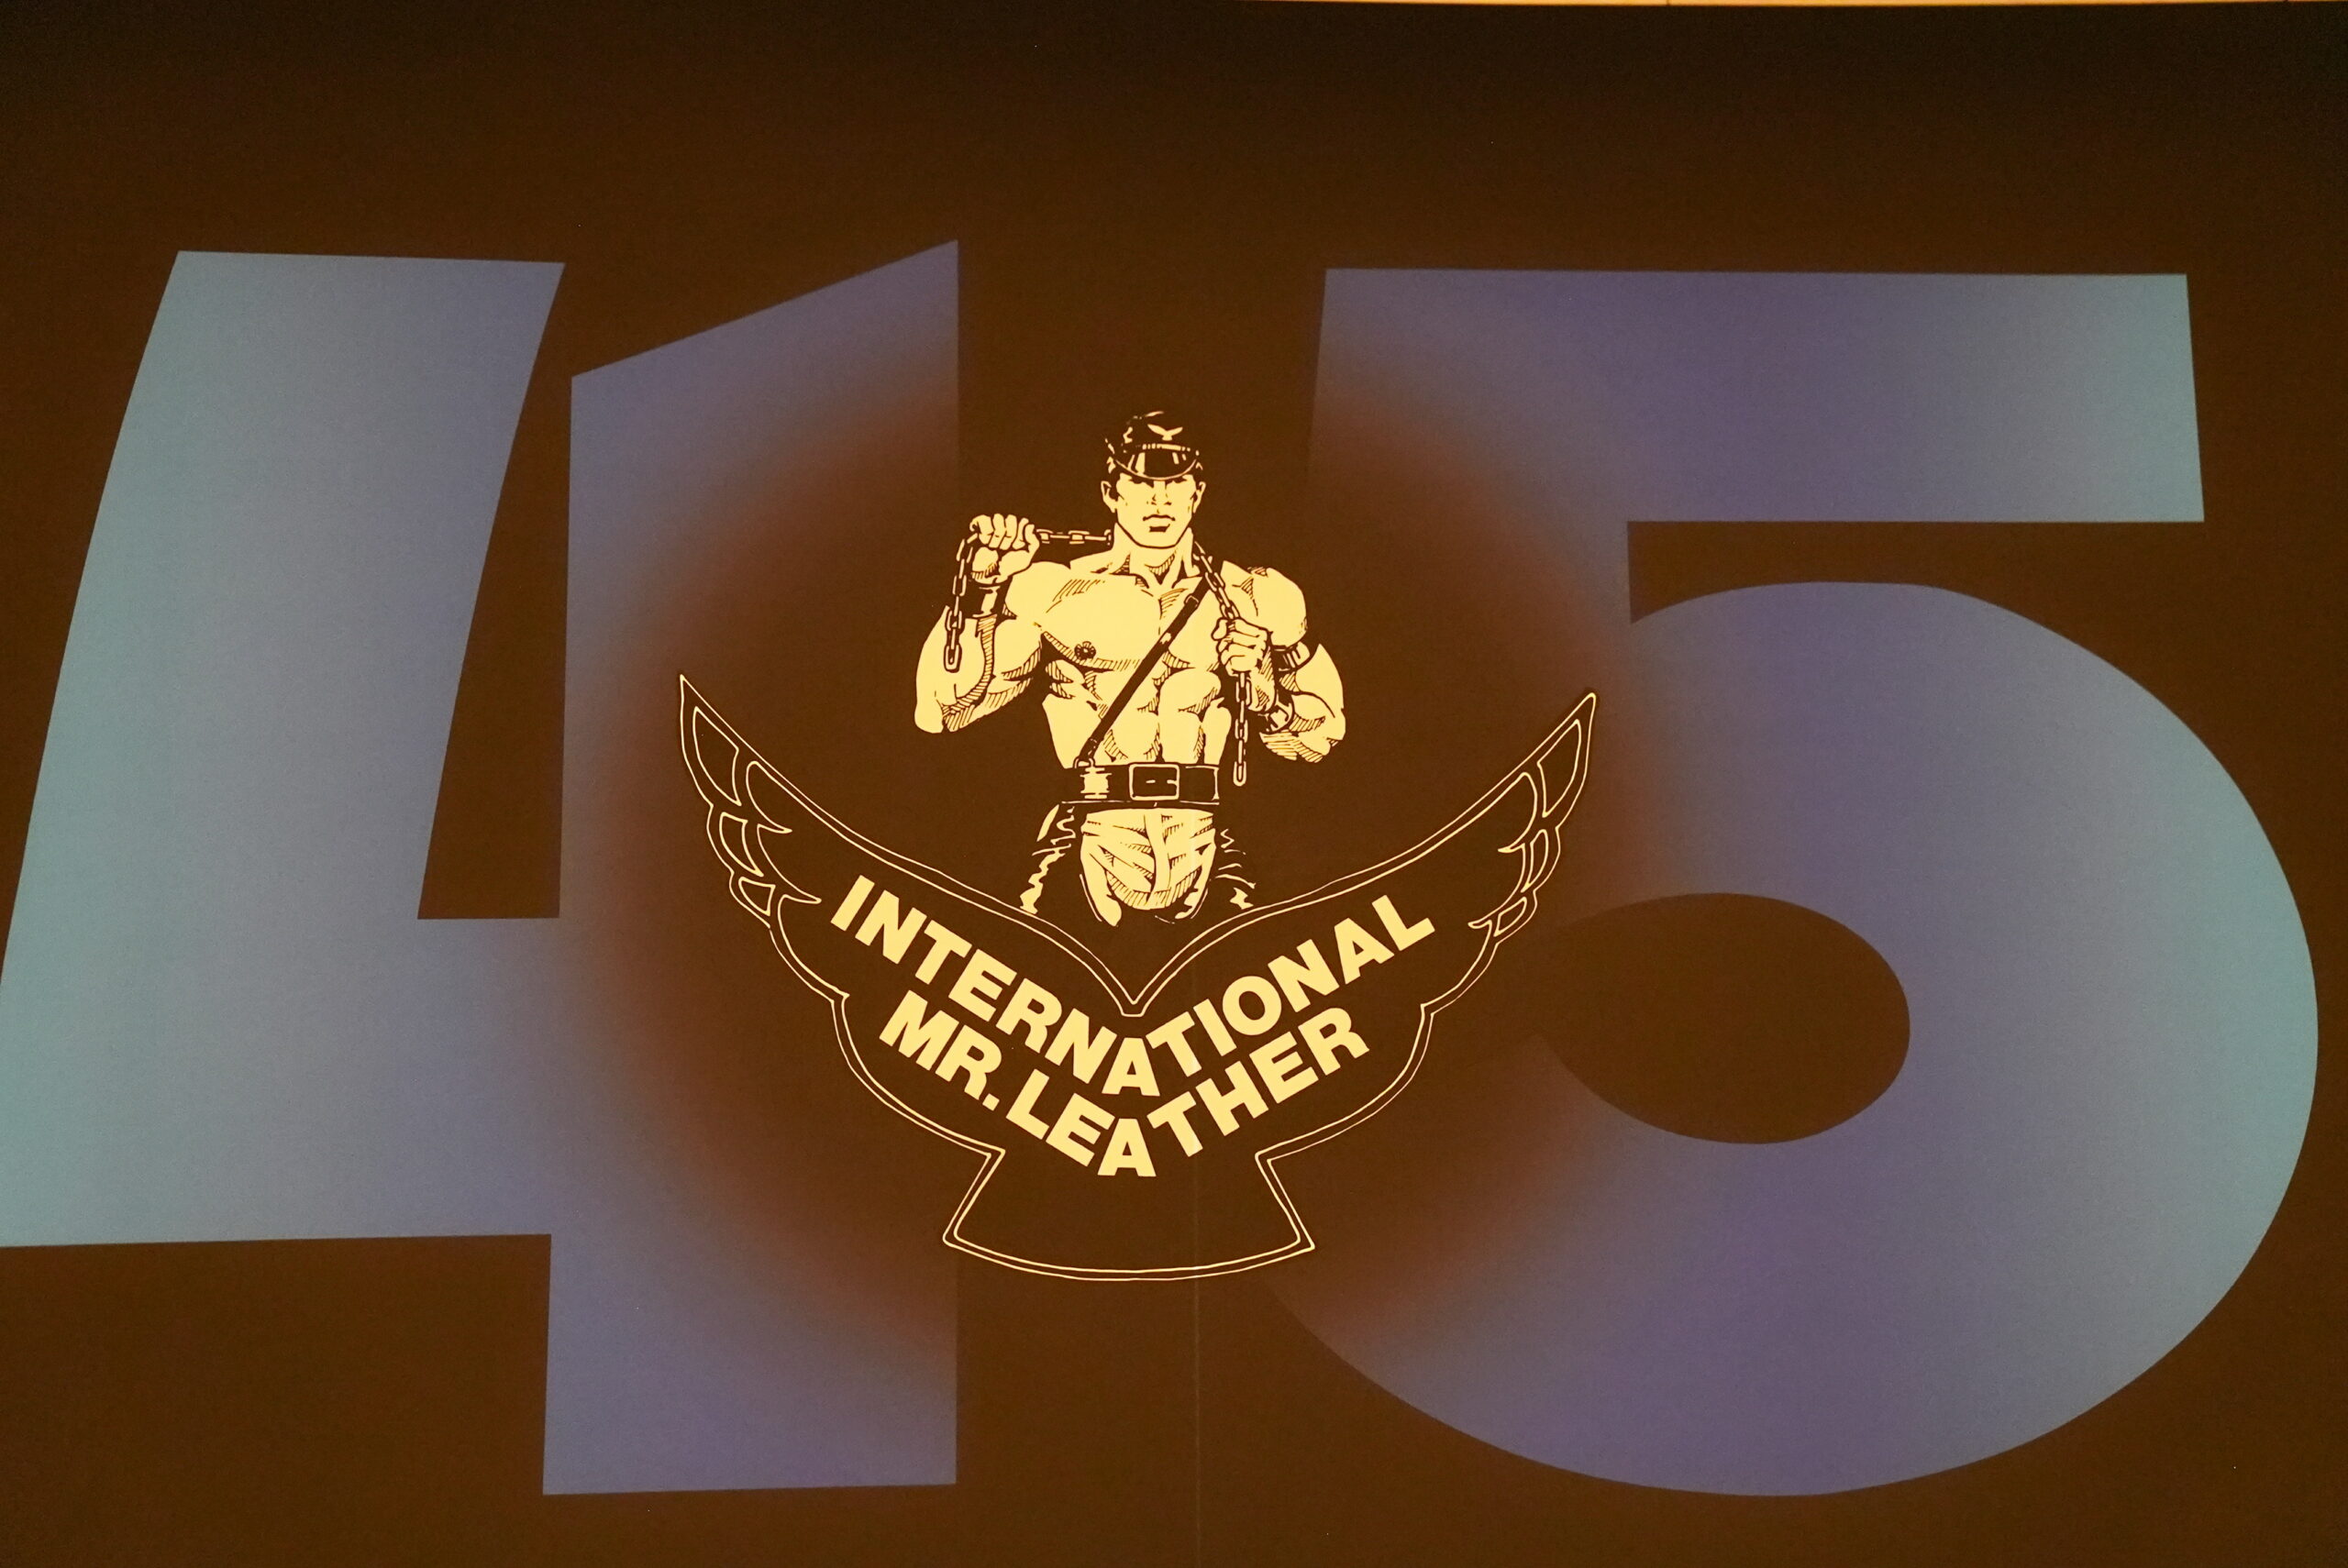 International Mr. Leather: the logo is a dove.